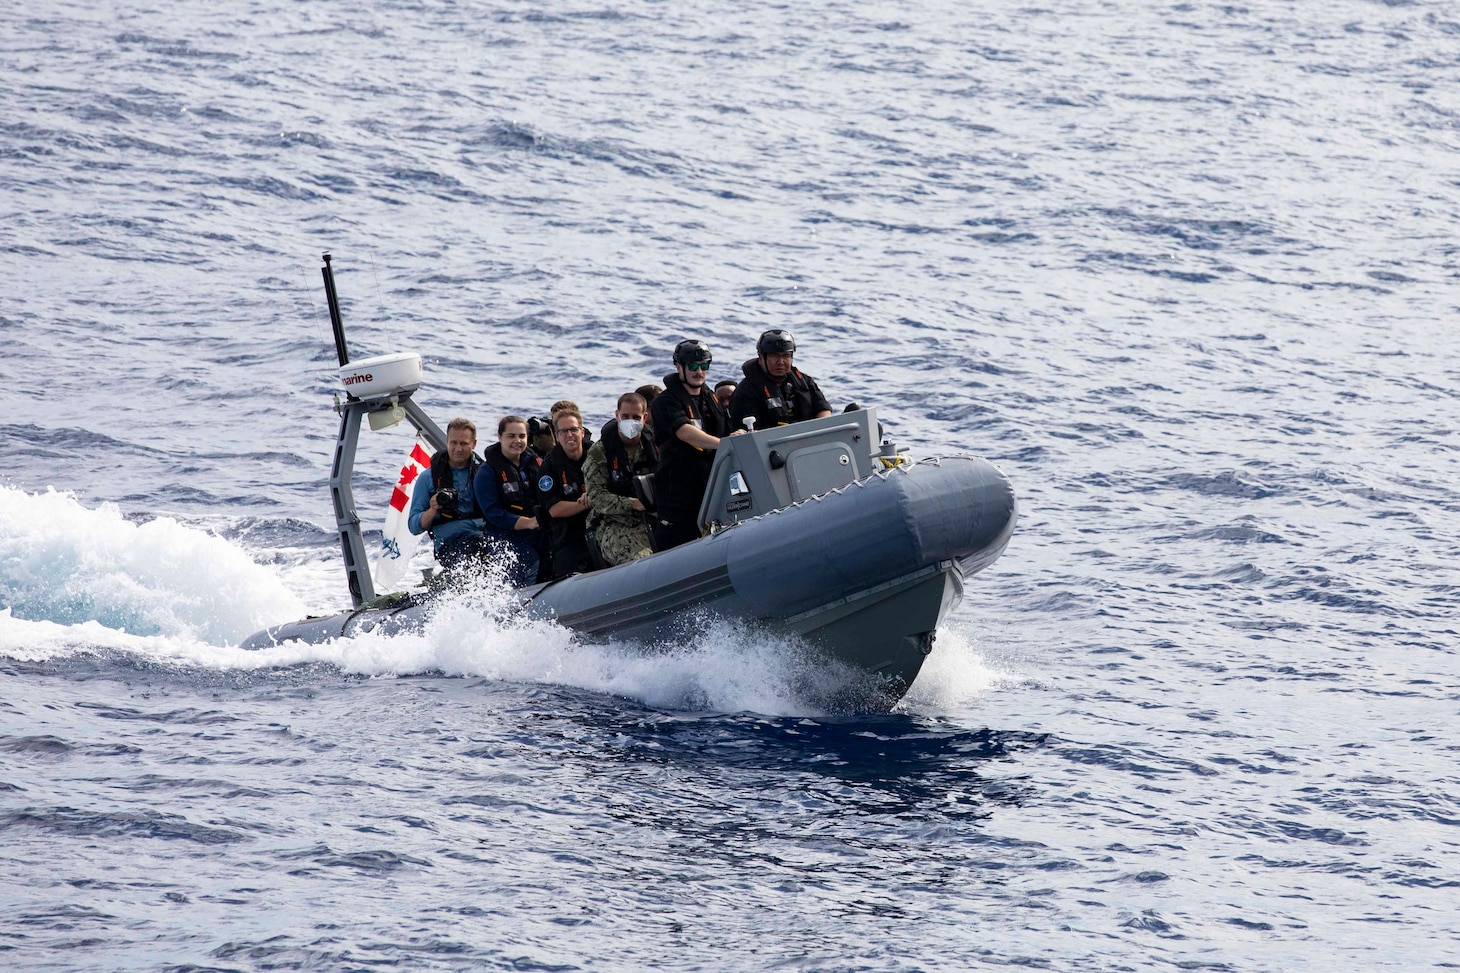 Sailors from His Majesty’s Canadian Ship (HMCS) Ottawa (FFH 341) pilot a rigid-hull inflatable boat (RHIB) toward Arleigh Burke-class guided-missile destroyer USS Ralph Johnson (DDG 114) Sep. 6 in the South China Sea. Ralph Johnson is assigned to Commander, Task Force 71/Destroyer Squadron (DESRON) 15, the Navy’s largest forward-deployed DESRON and the U.S. 7th Fleet’s principal surface force.